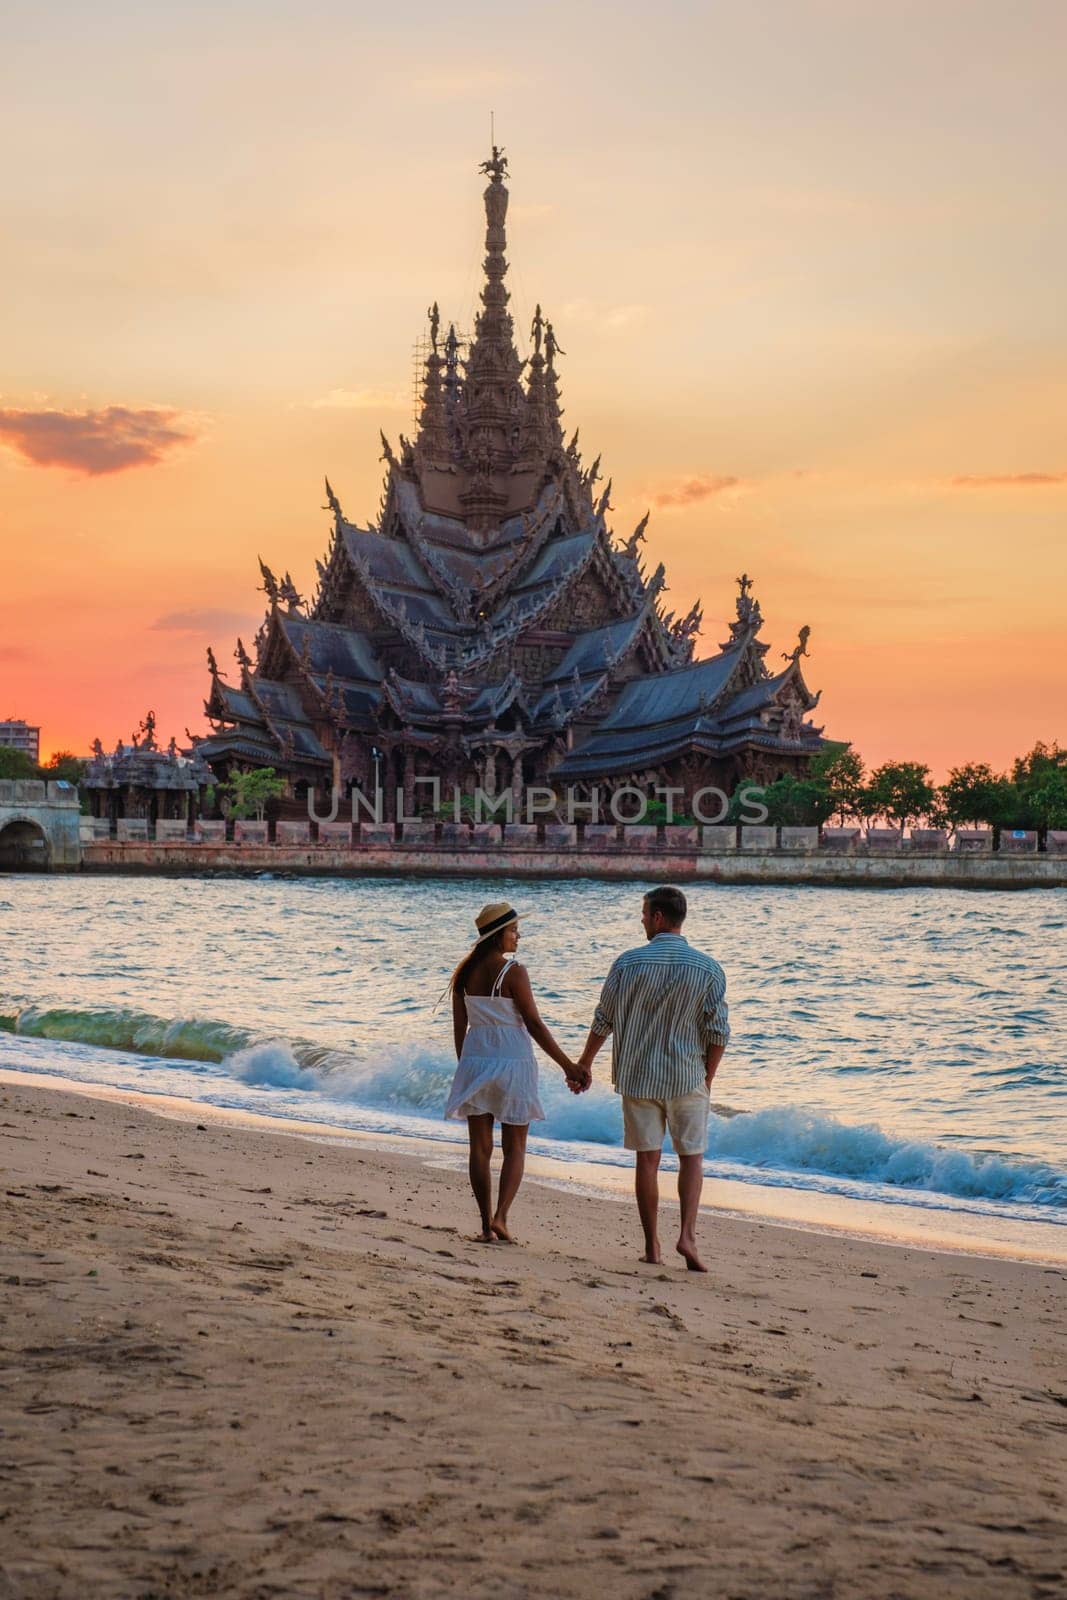 A diverse multiethnic couple of men and women visit The Sanctuary of Truth wooden temple in Pattaya Thailand at sunset on the beach